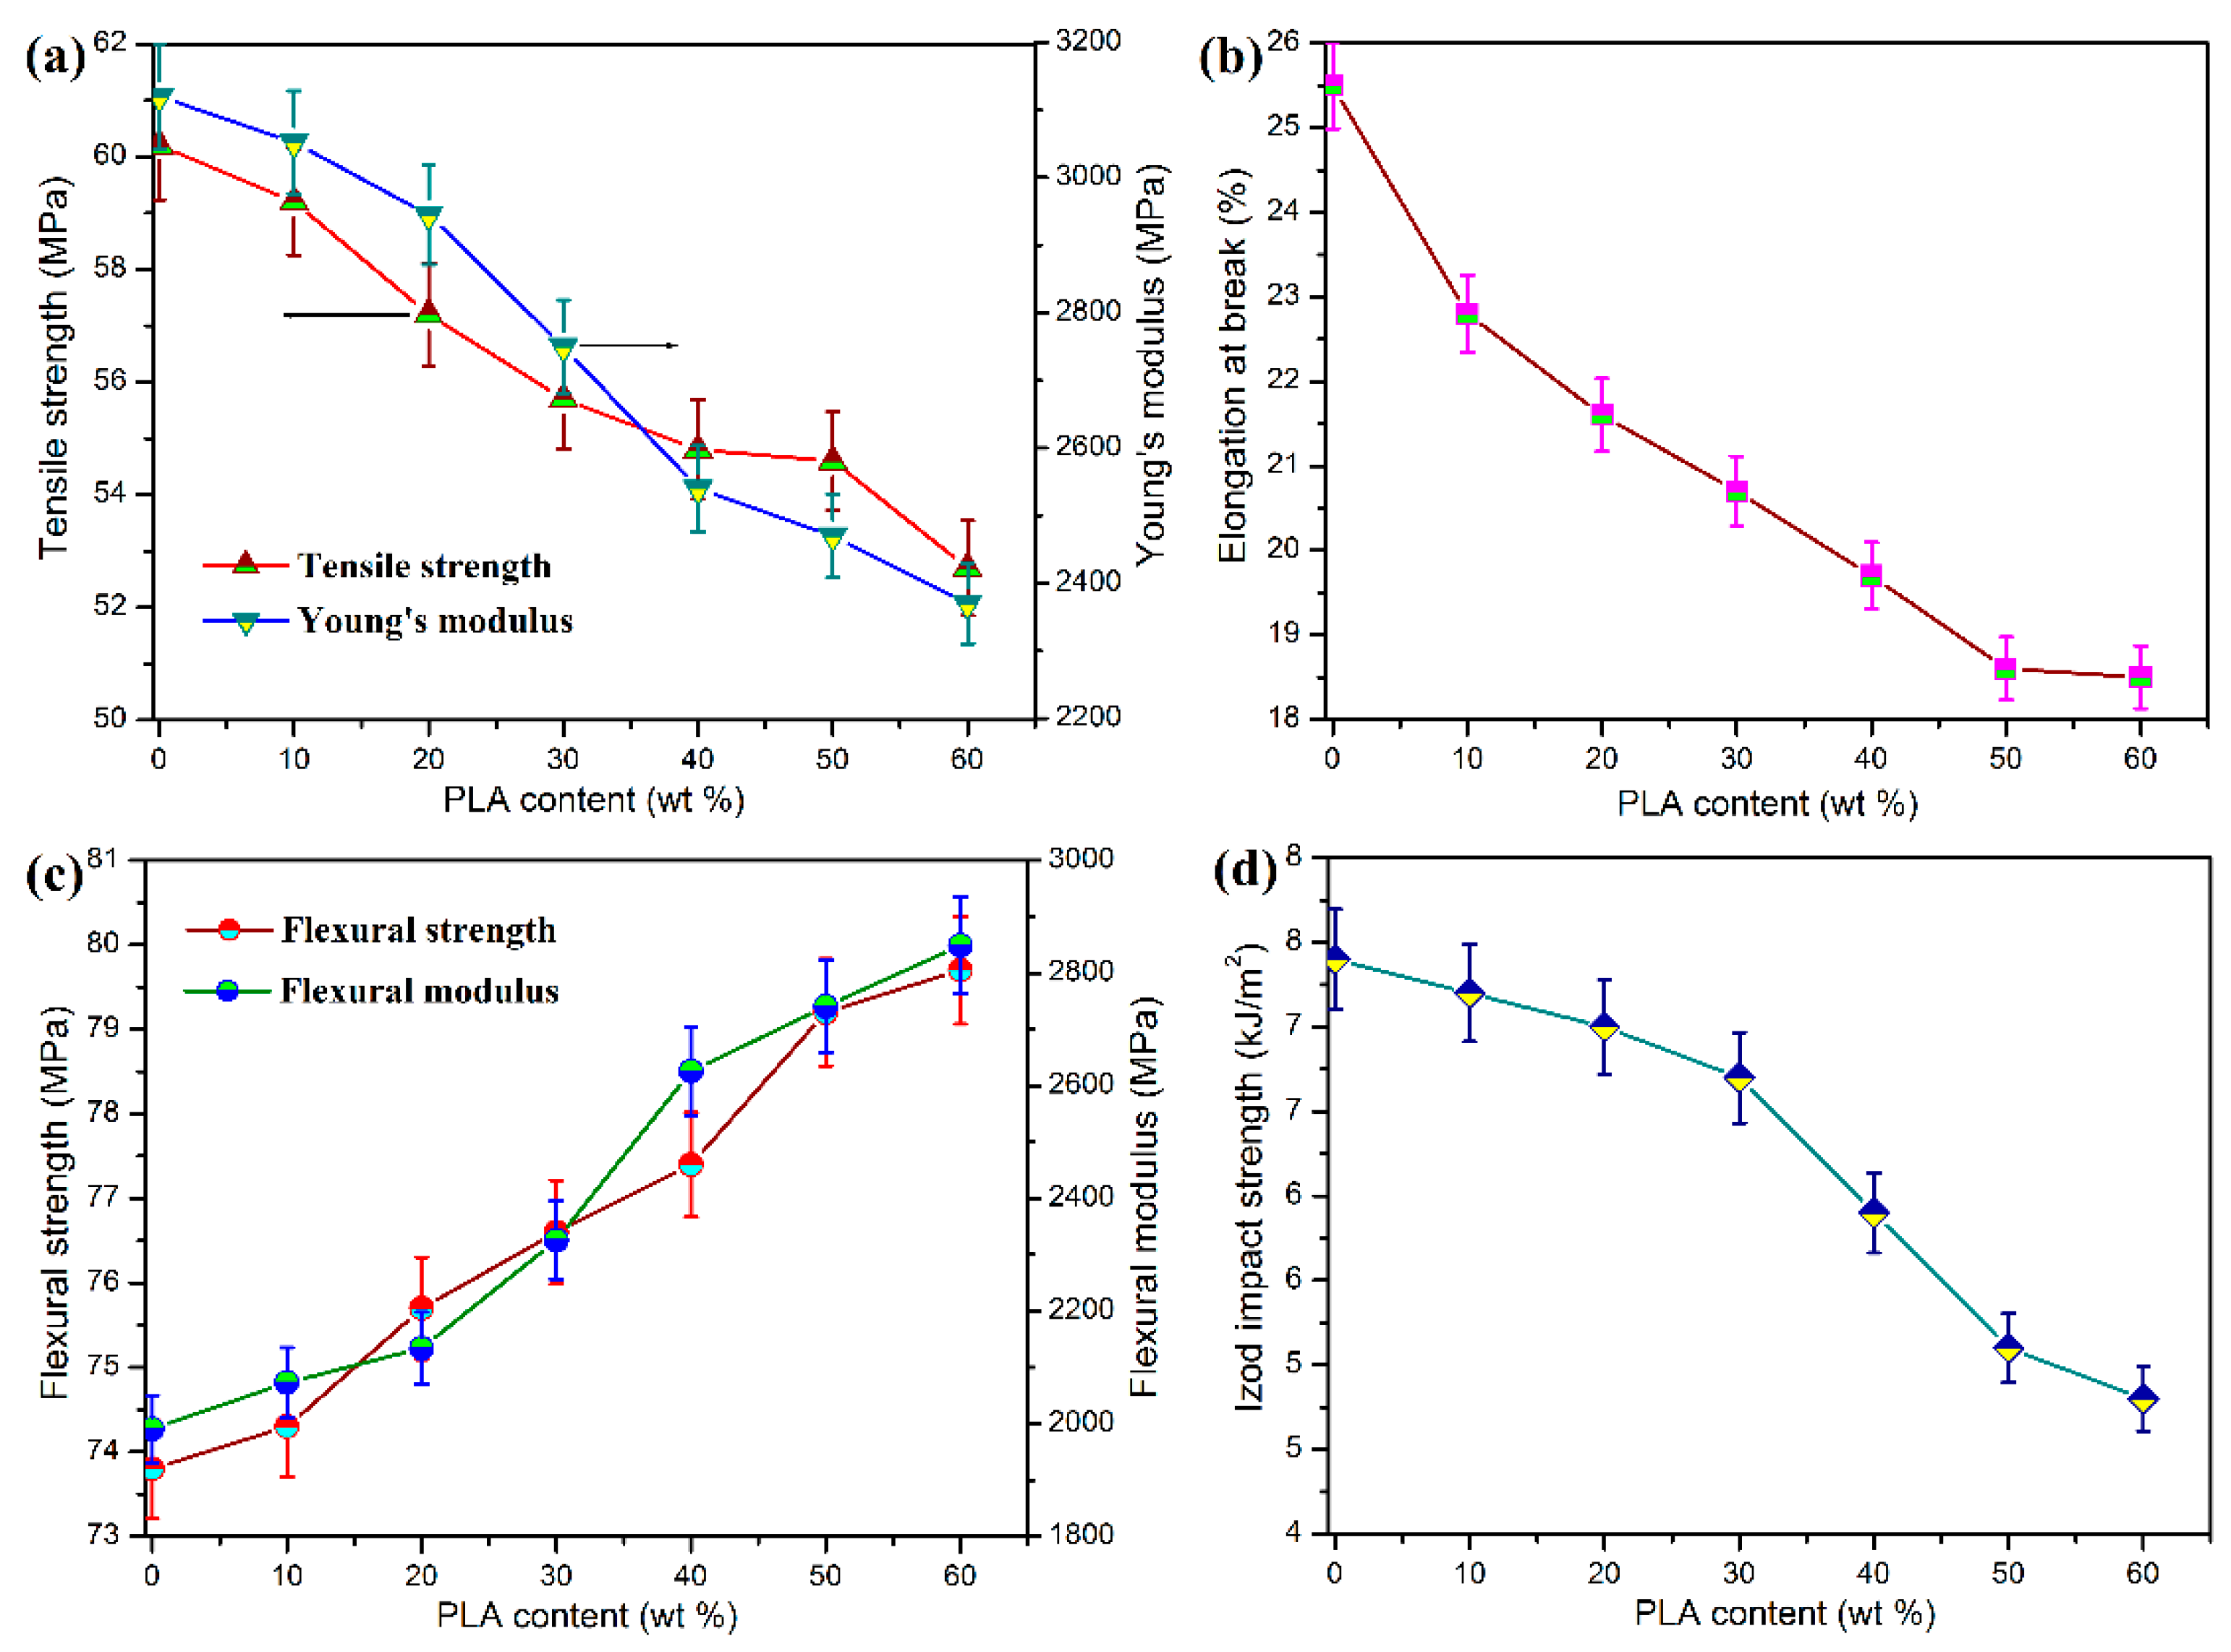 Polymers | Free Full-Text | Development of Polyoxymethylene/Polylactide  Blends for a Potentially Biodegradable Material: Crystallization Kinetics,  Lifespan Prediction, and Enzymatic Degradation Behavior | HTML